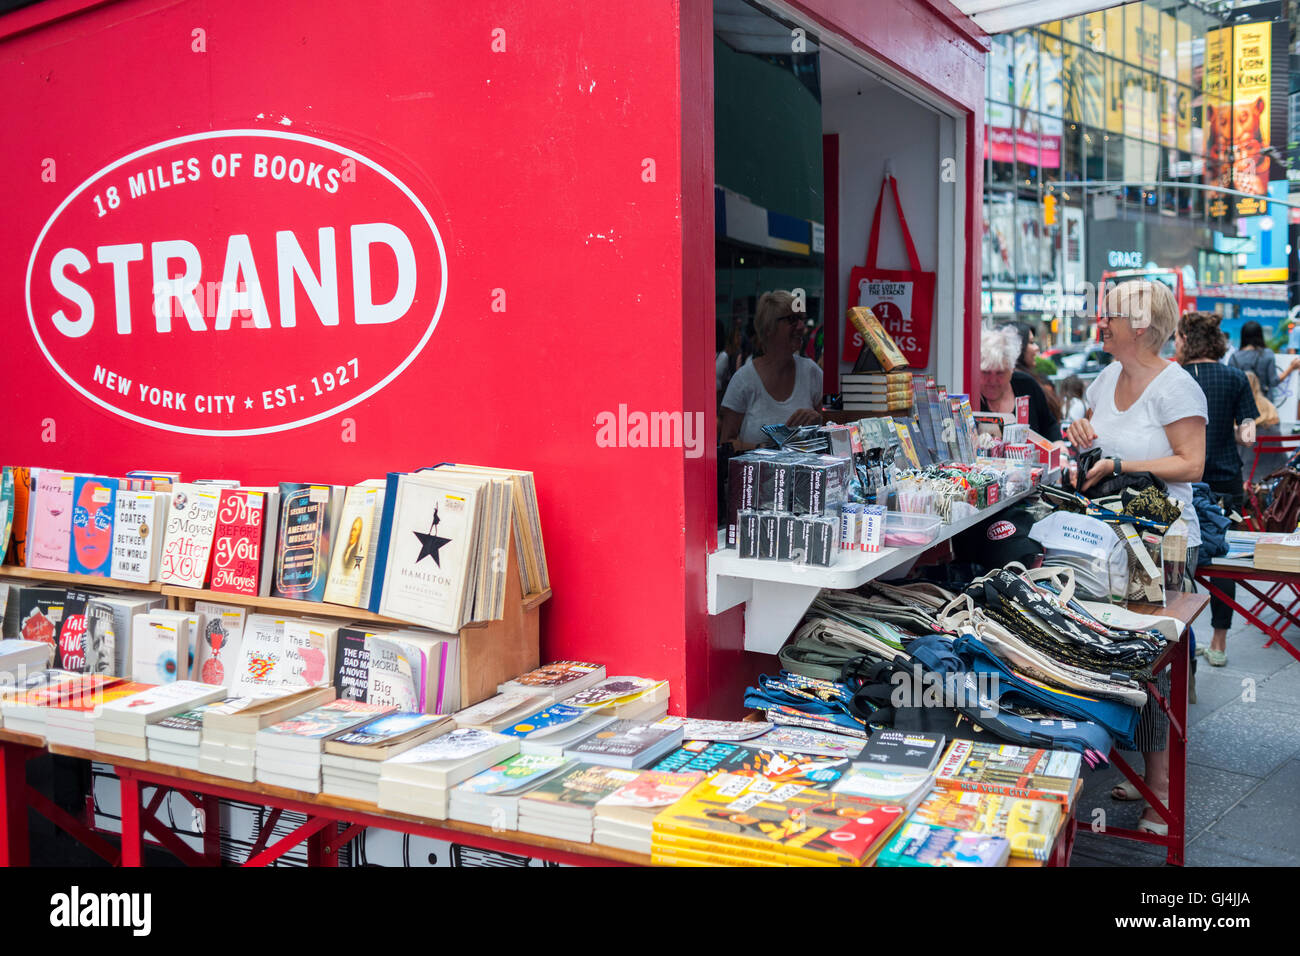 Customers browse books and novelties at a satellite of the famous Strand bookstore in Times Square in New York on Tuesday, August 2, 2016. (© Frances M. Roberts) Stock Photo